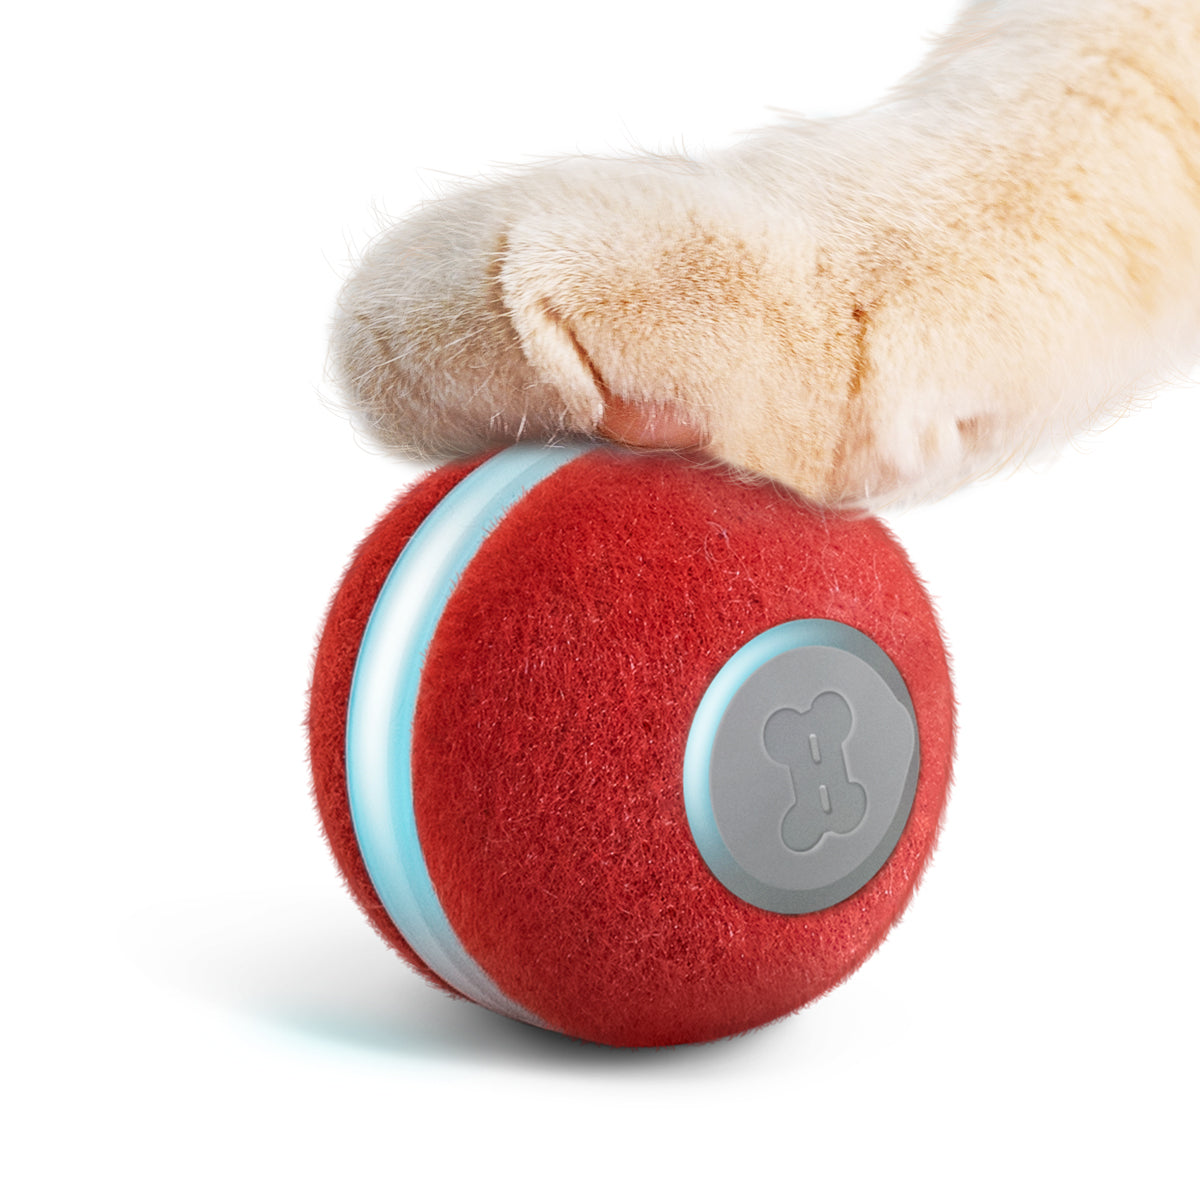 Velarosy Cat Toy, Velarosy Smart Ball, Wloom Power Ball 2.0 Cat Toy,  Intelligent Interactive Cat Toys Ball with Led Lights, Automatic Rolling  Toy Cat